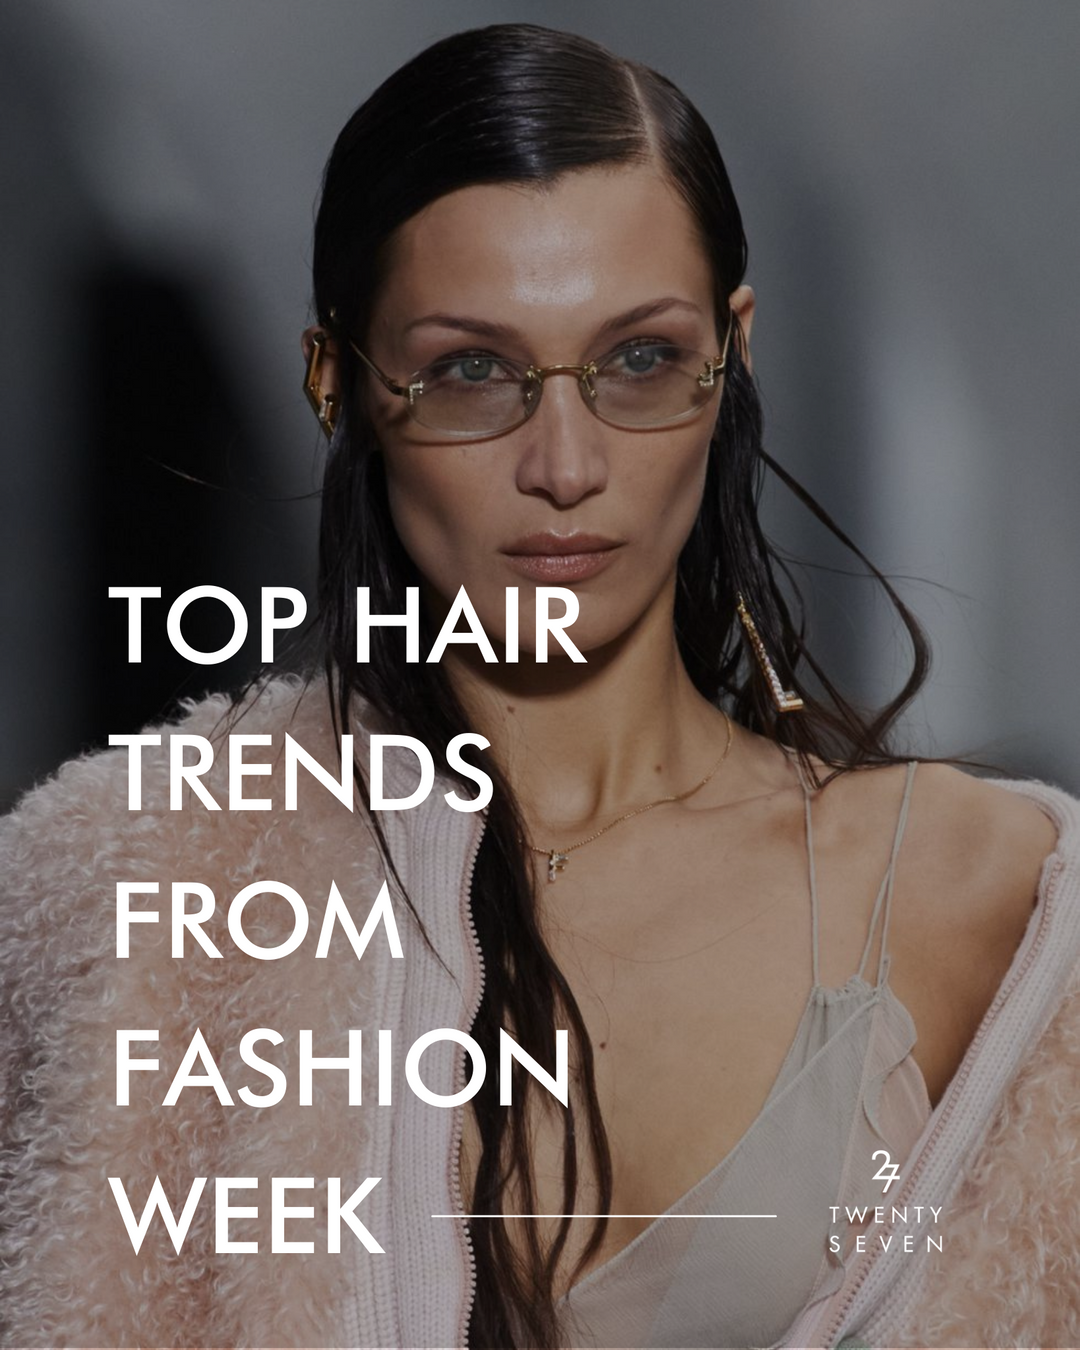 The Top Hair Trends from Fashion Week A/W 2022